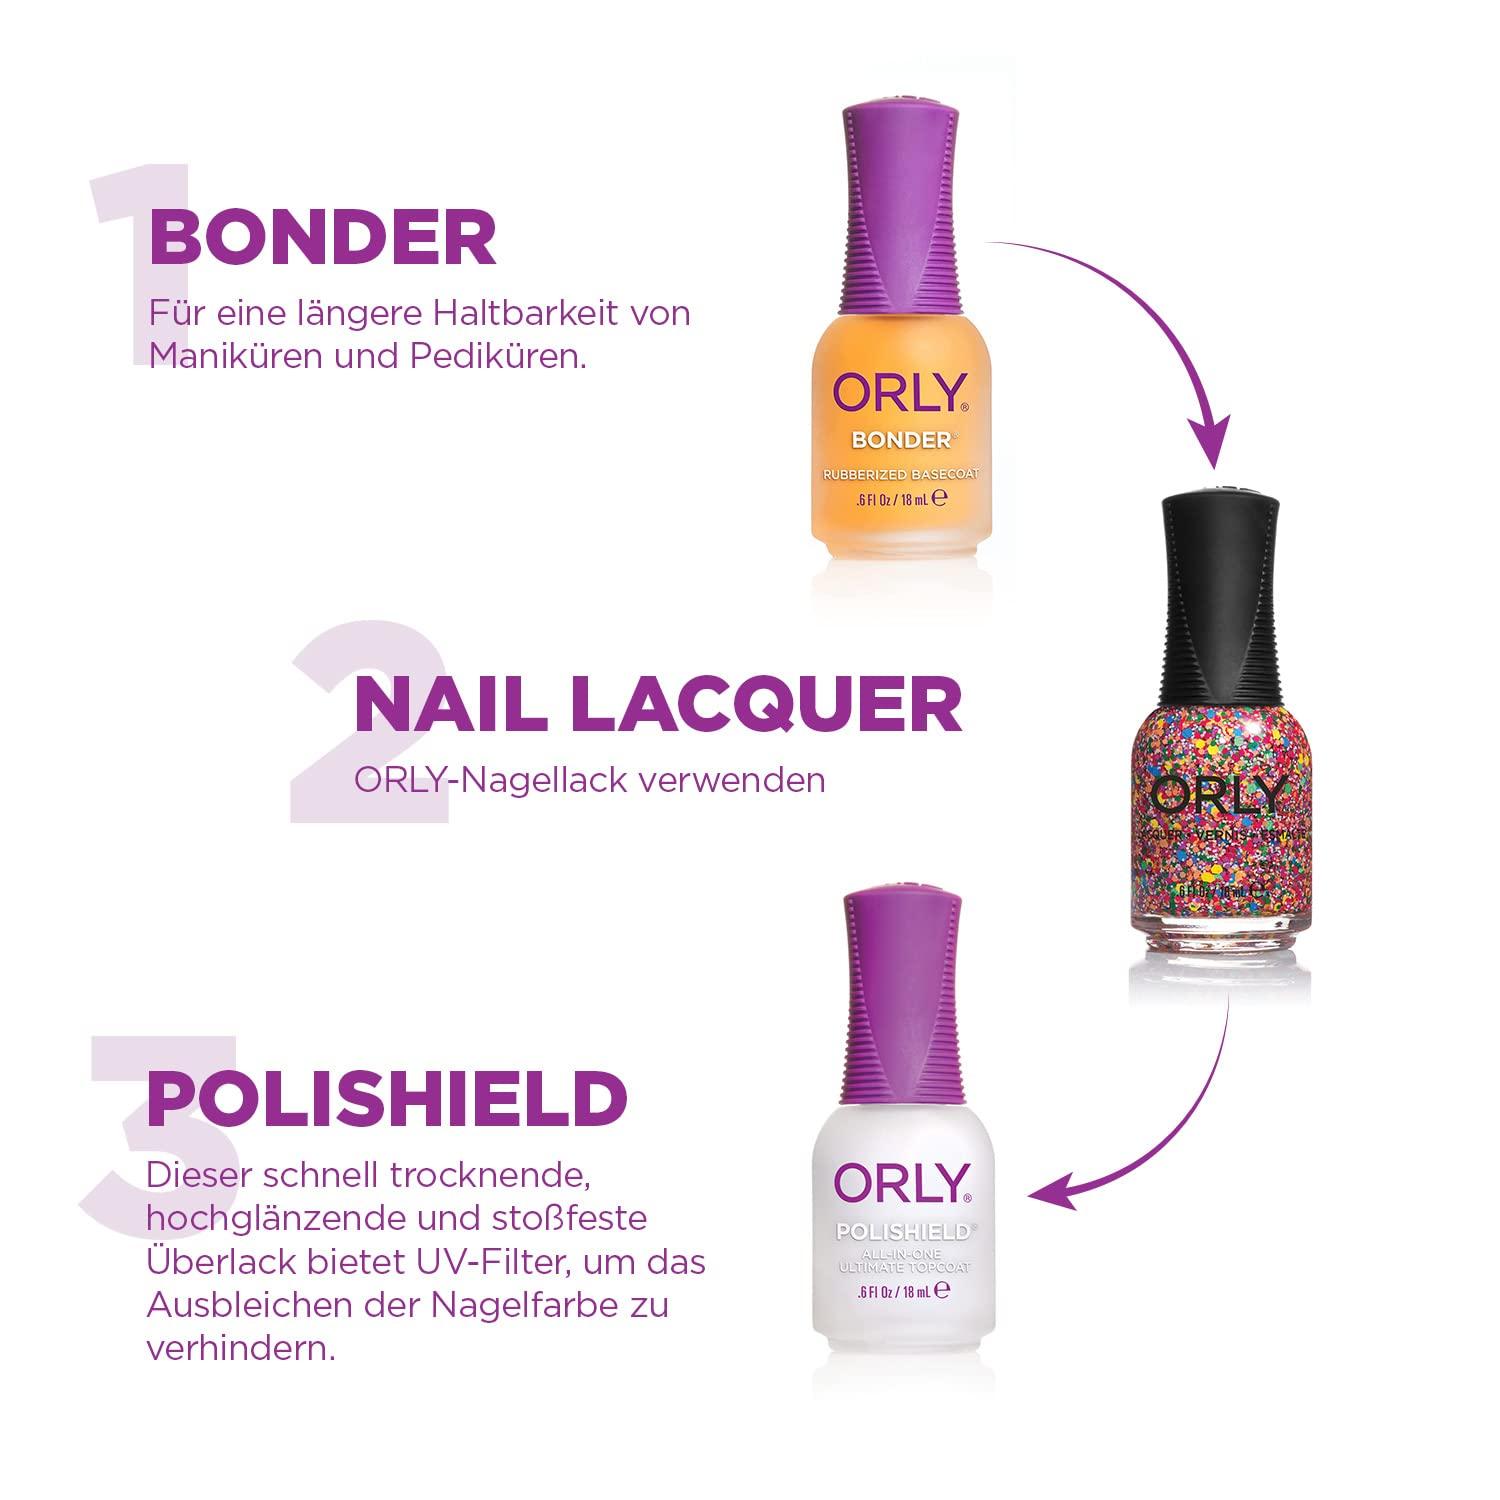 Buy Orly Nail Armor .6 oz. Online at Lowest Price Ever in India | Check  Reviews & Ratings - Shop The World